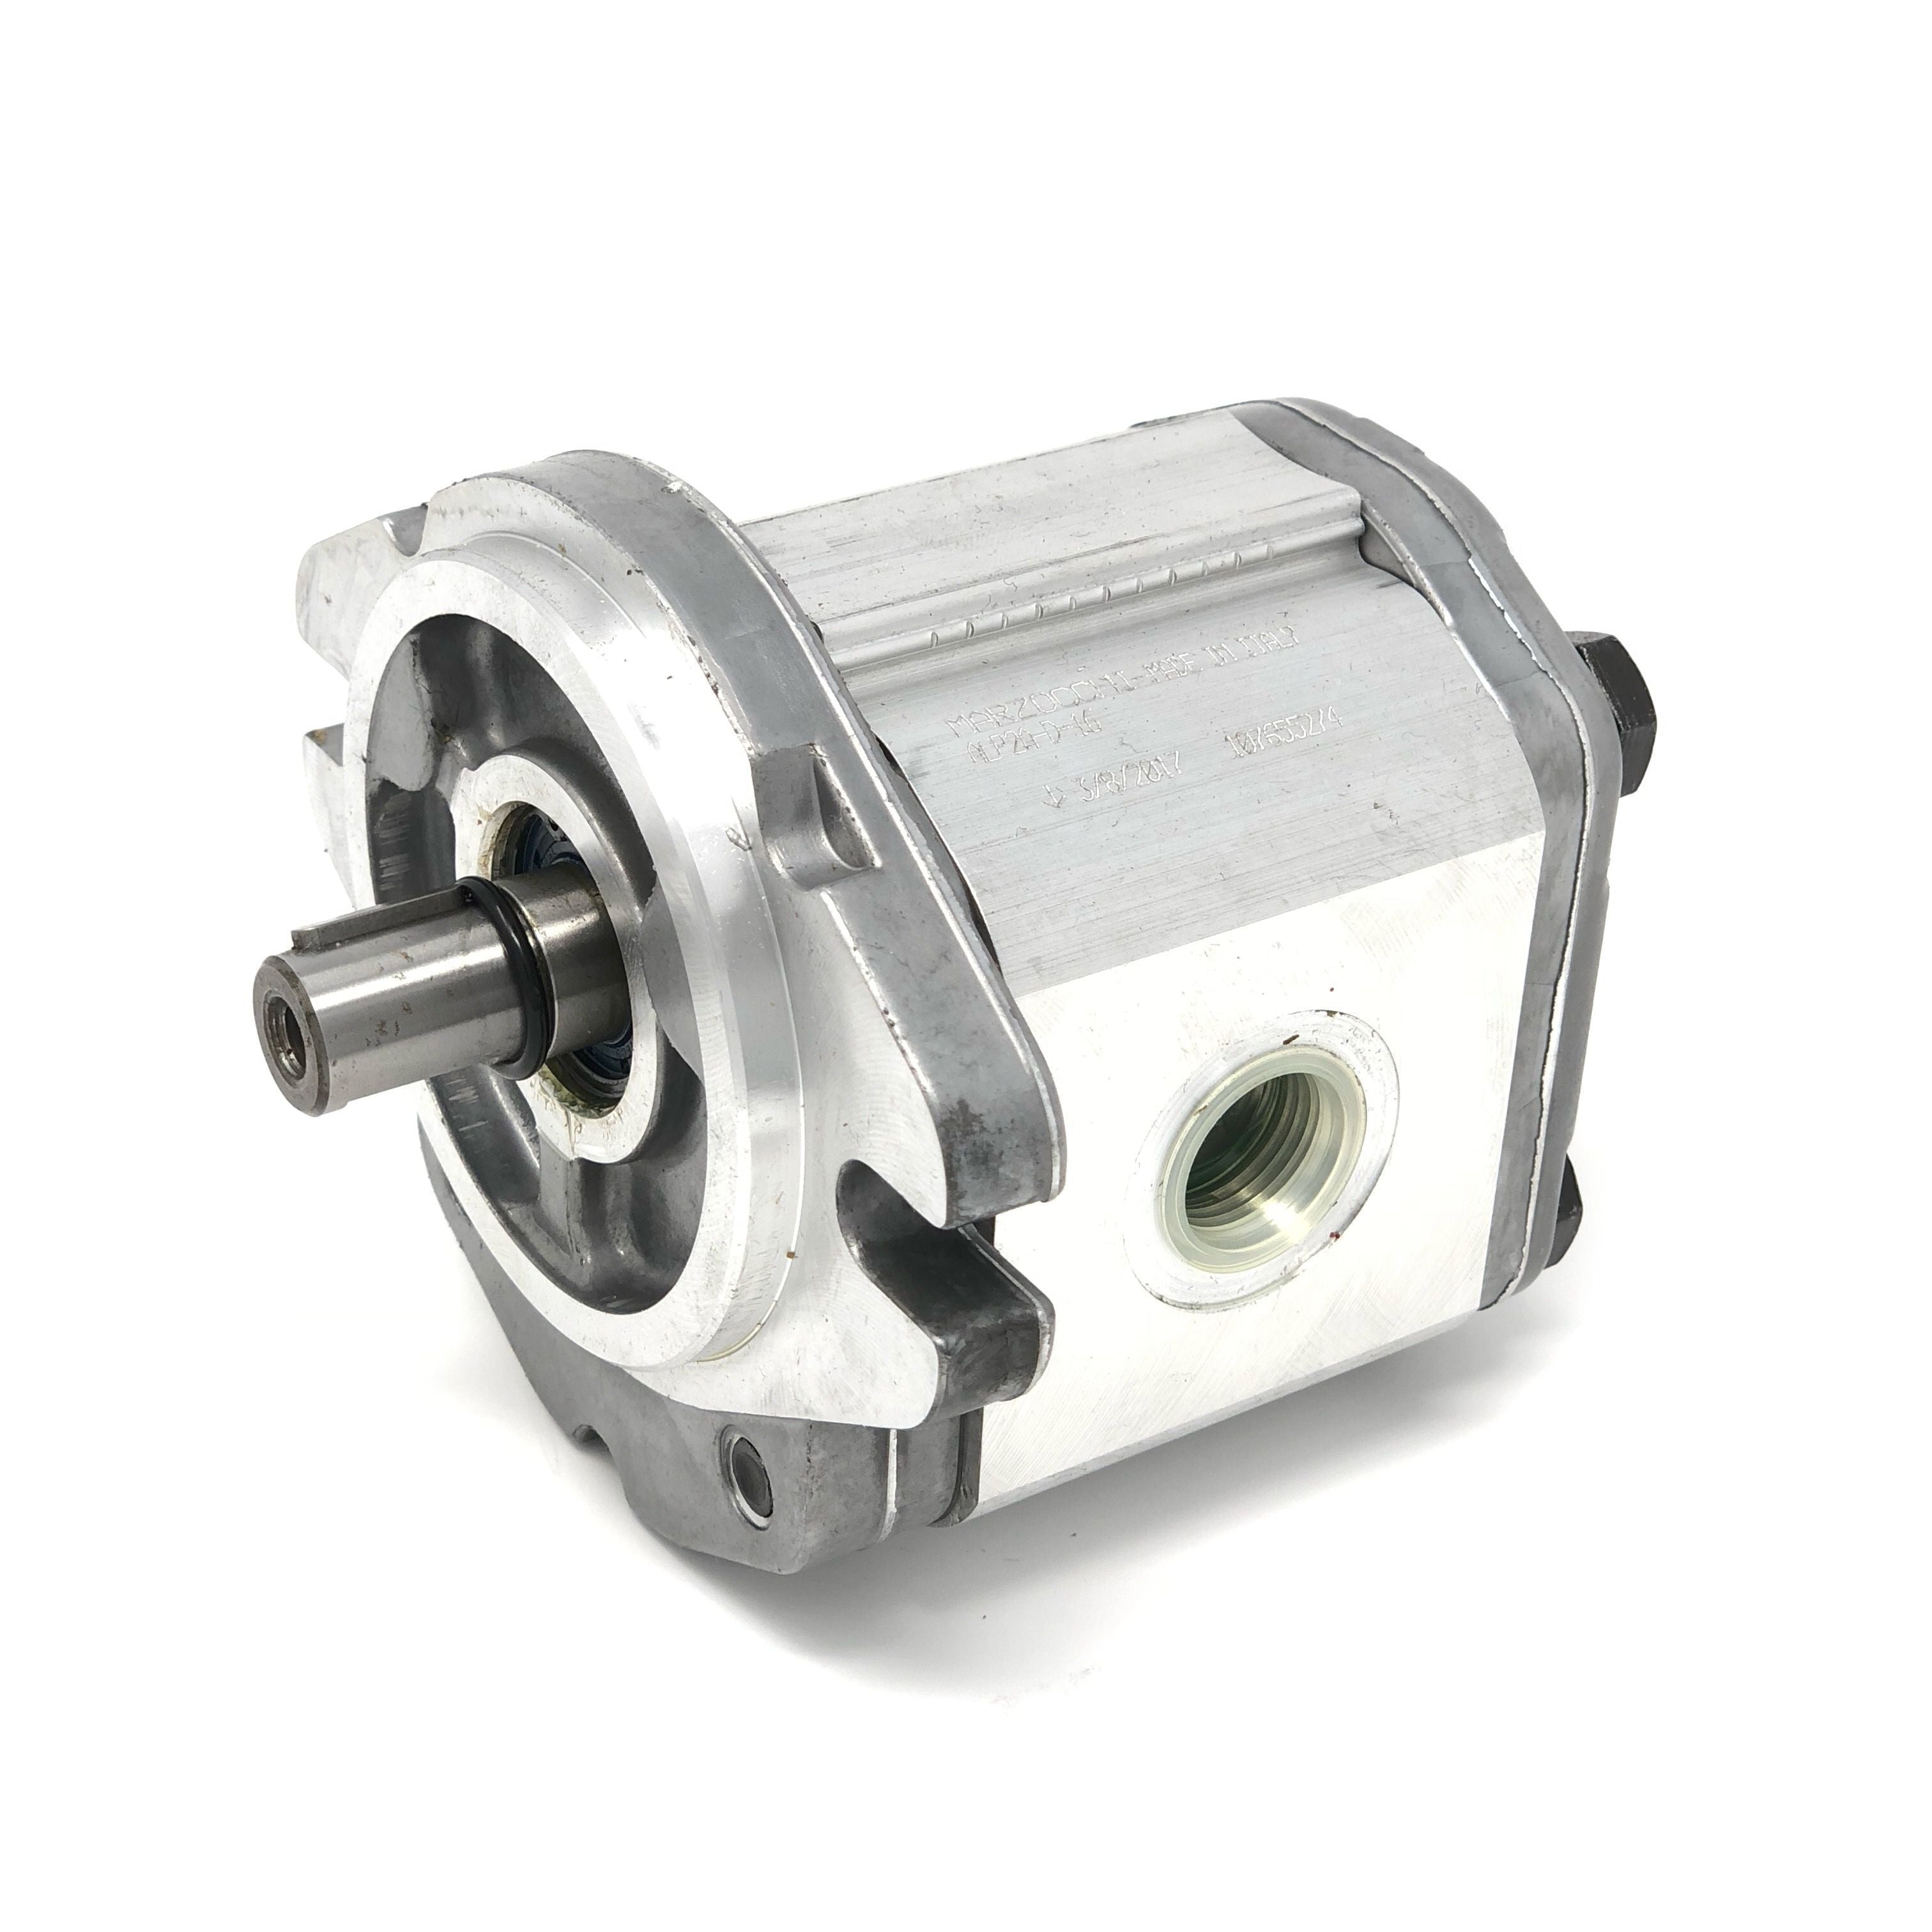 ALP1A-D-9 : Marzocchi Gear Pump, CW, 6.2cc (0.3782in3), 2.95 GPM, 3335psi, 3000 RPM, #8 SAE (1/2") In, #6 SAE (3/8") Out, Keyed Shaft 1/2" Bore x 1/8" Key, SAE AA 2-Bolt Mount